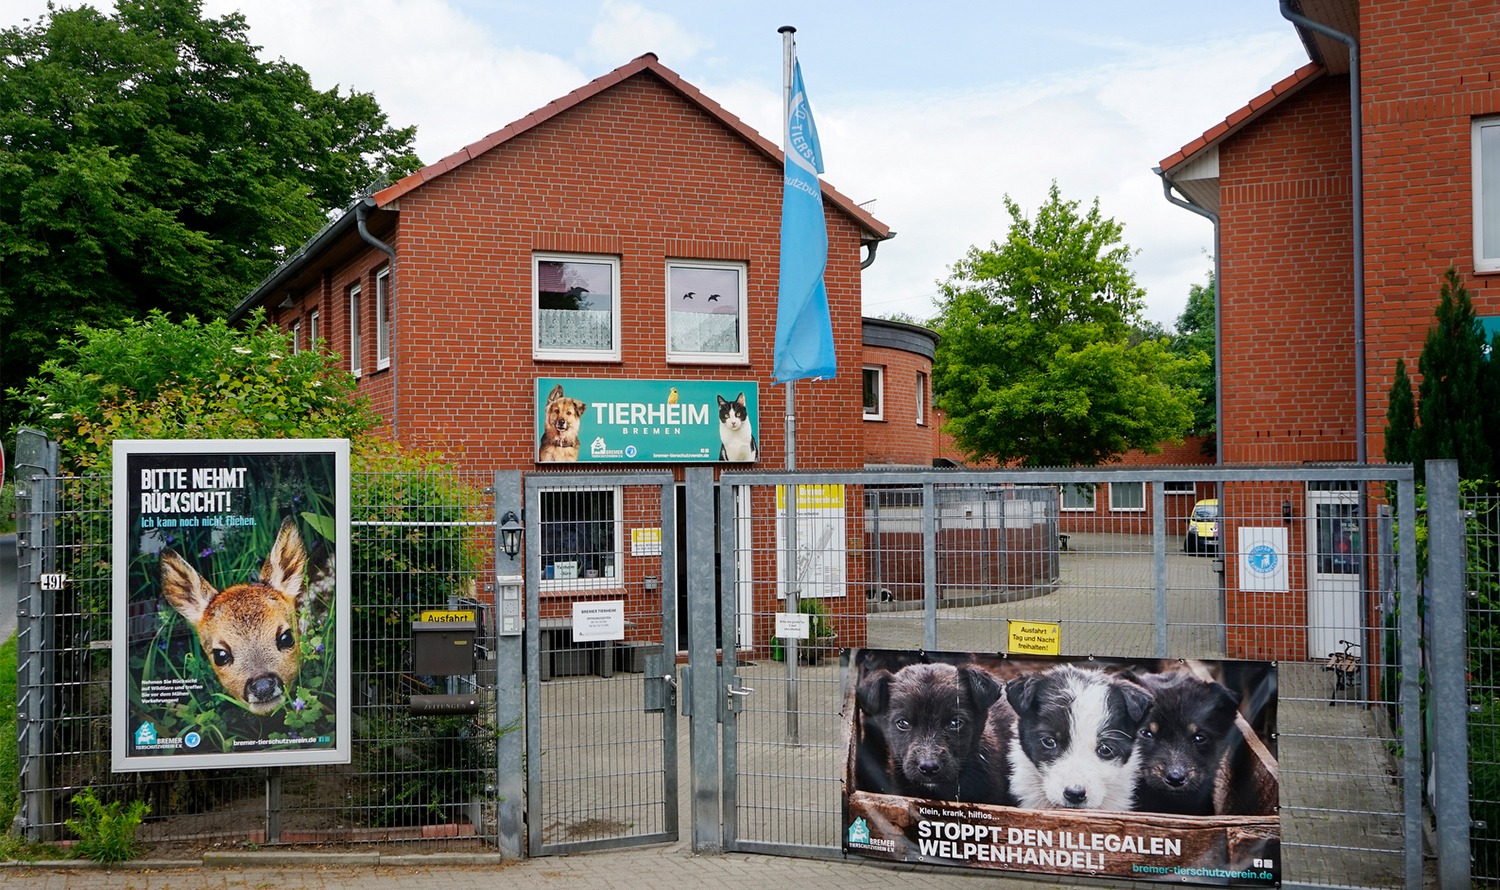 Exterior view of the Bremen animal shelter.